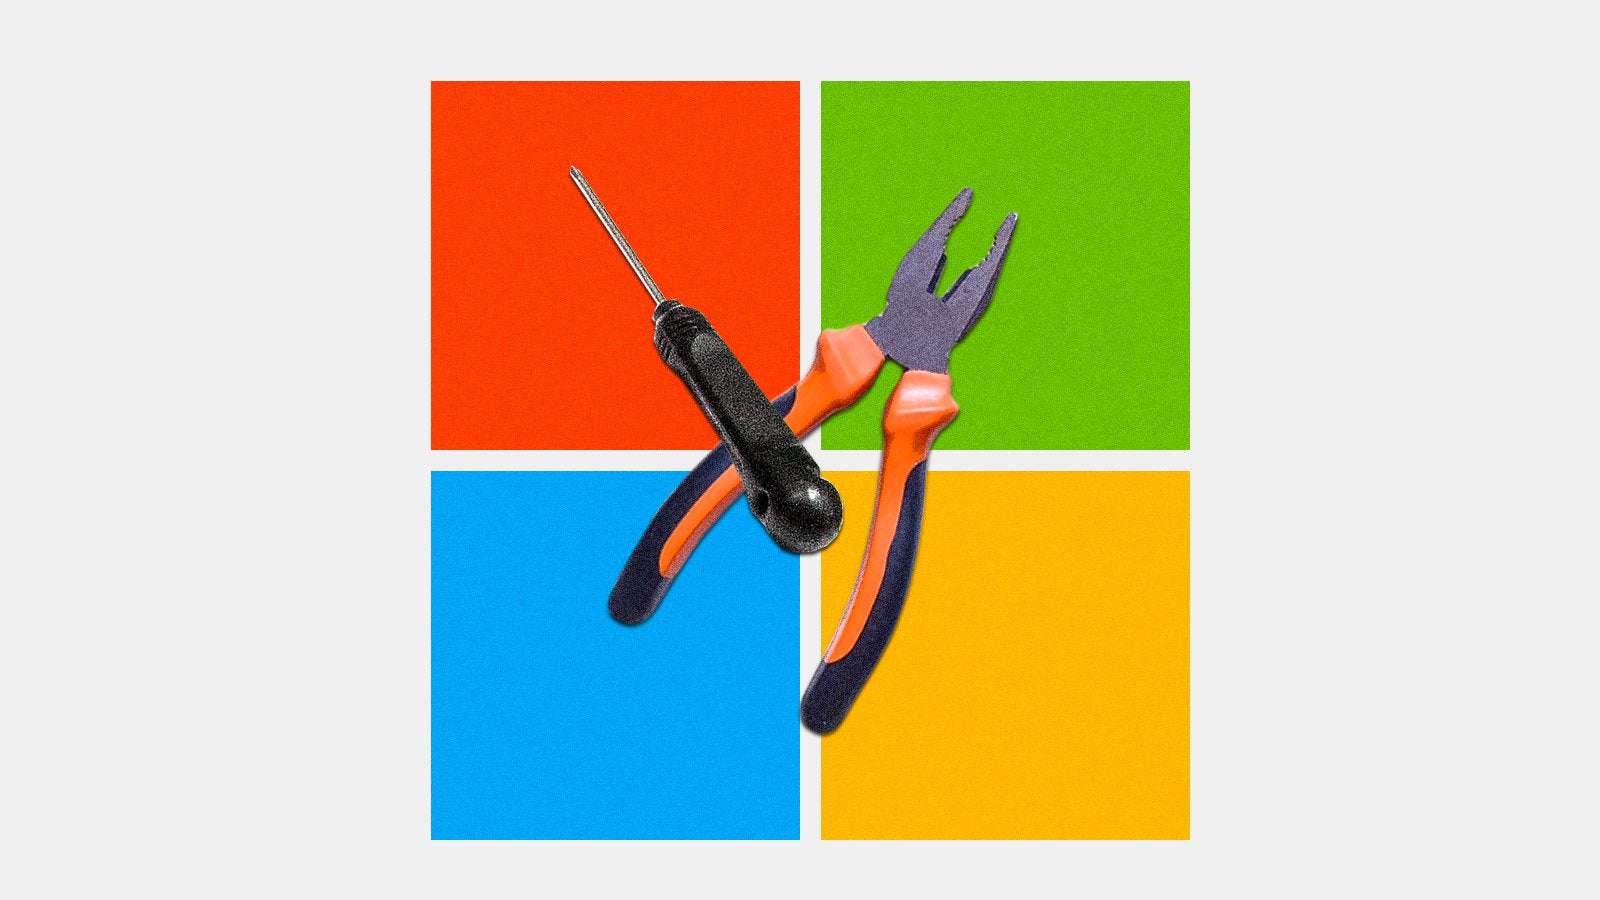 image for Bowing to investors, Microsoft will make its devices easier to fix